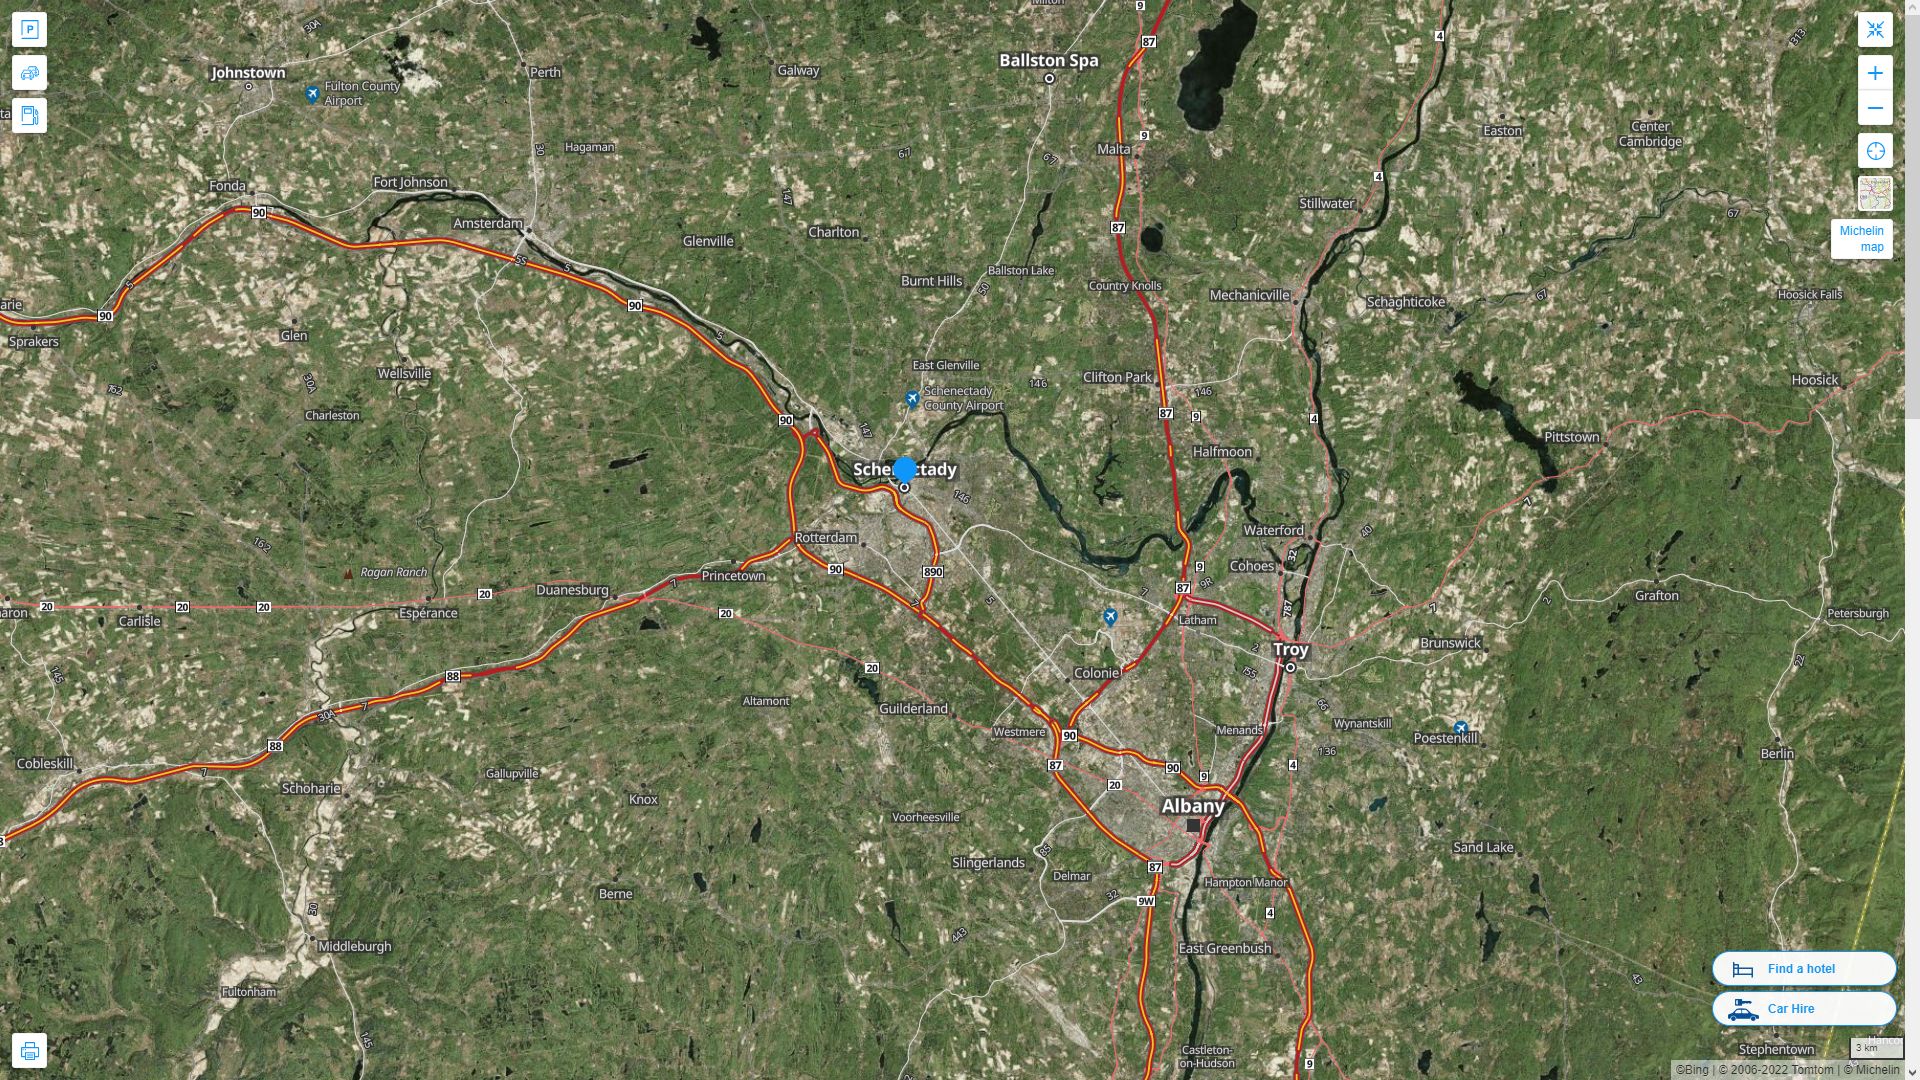 Schenectady New York Highway and Road Map with Satellite View